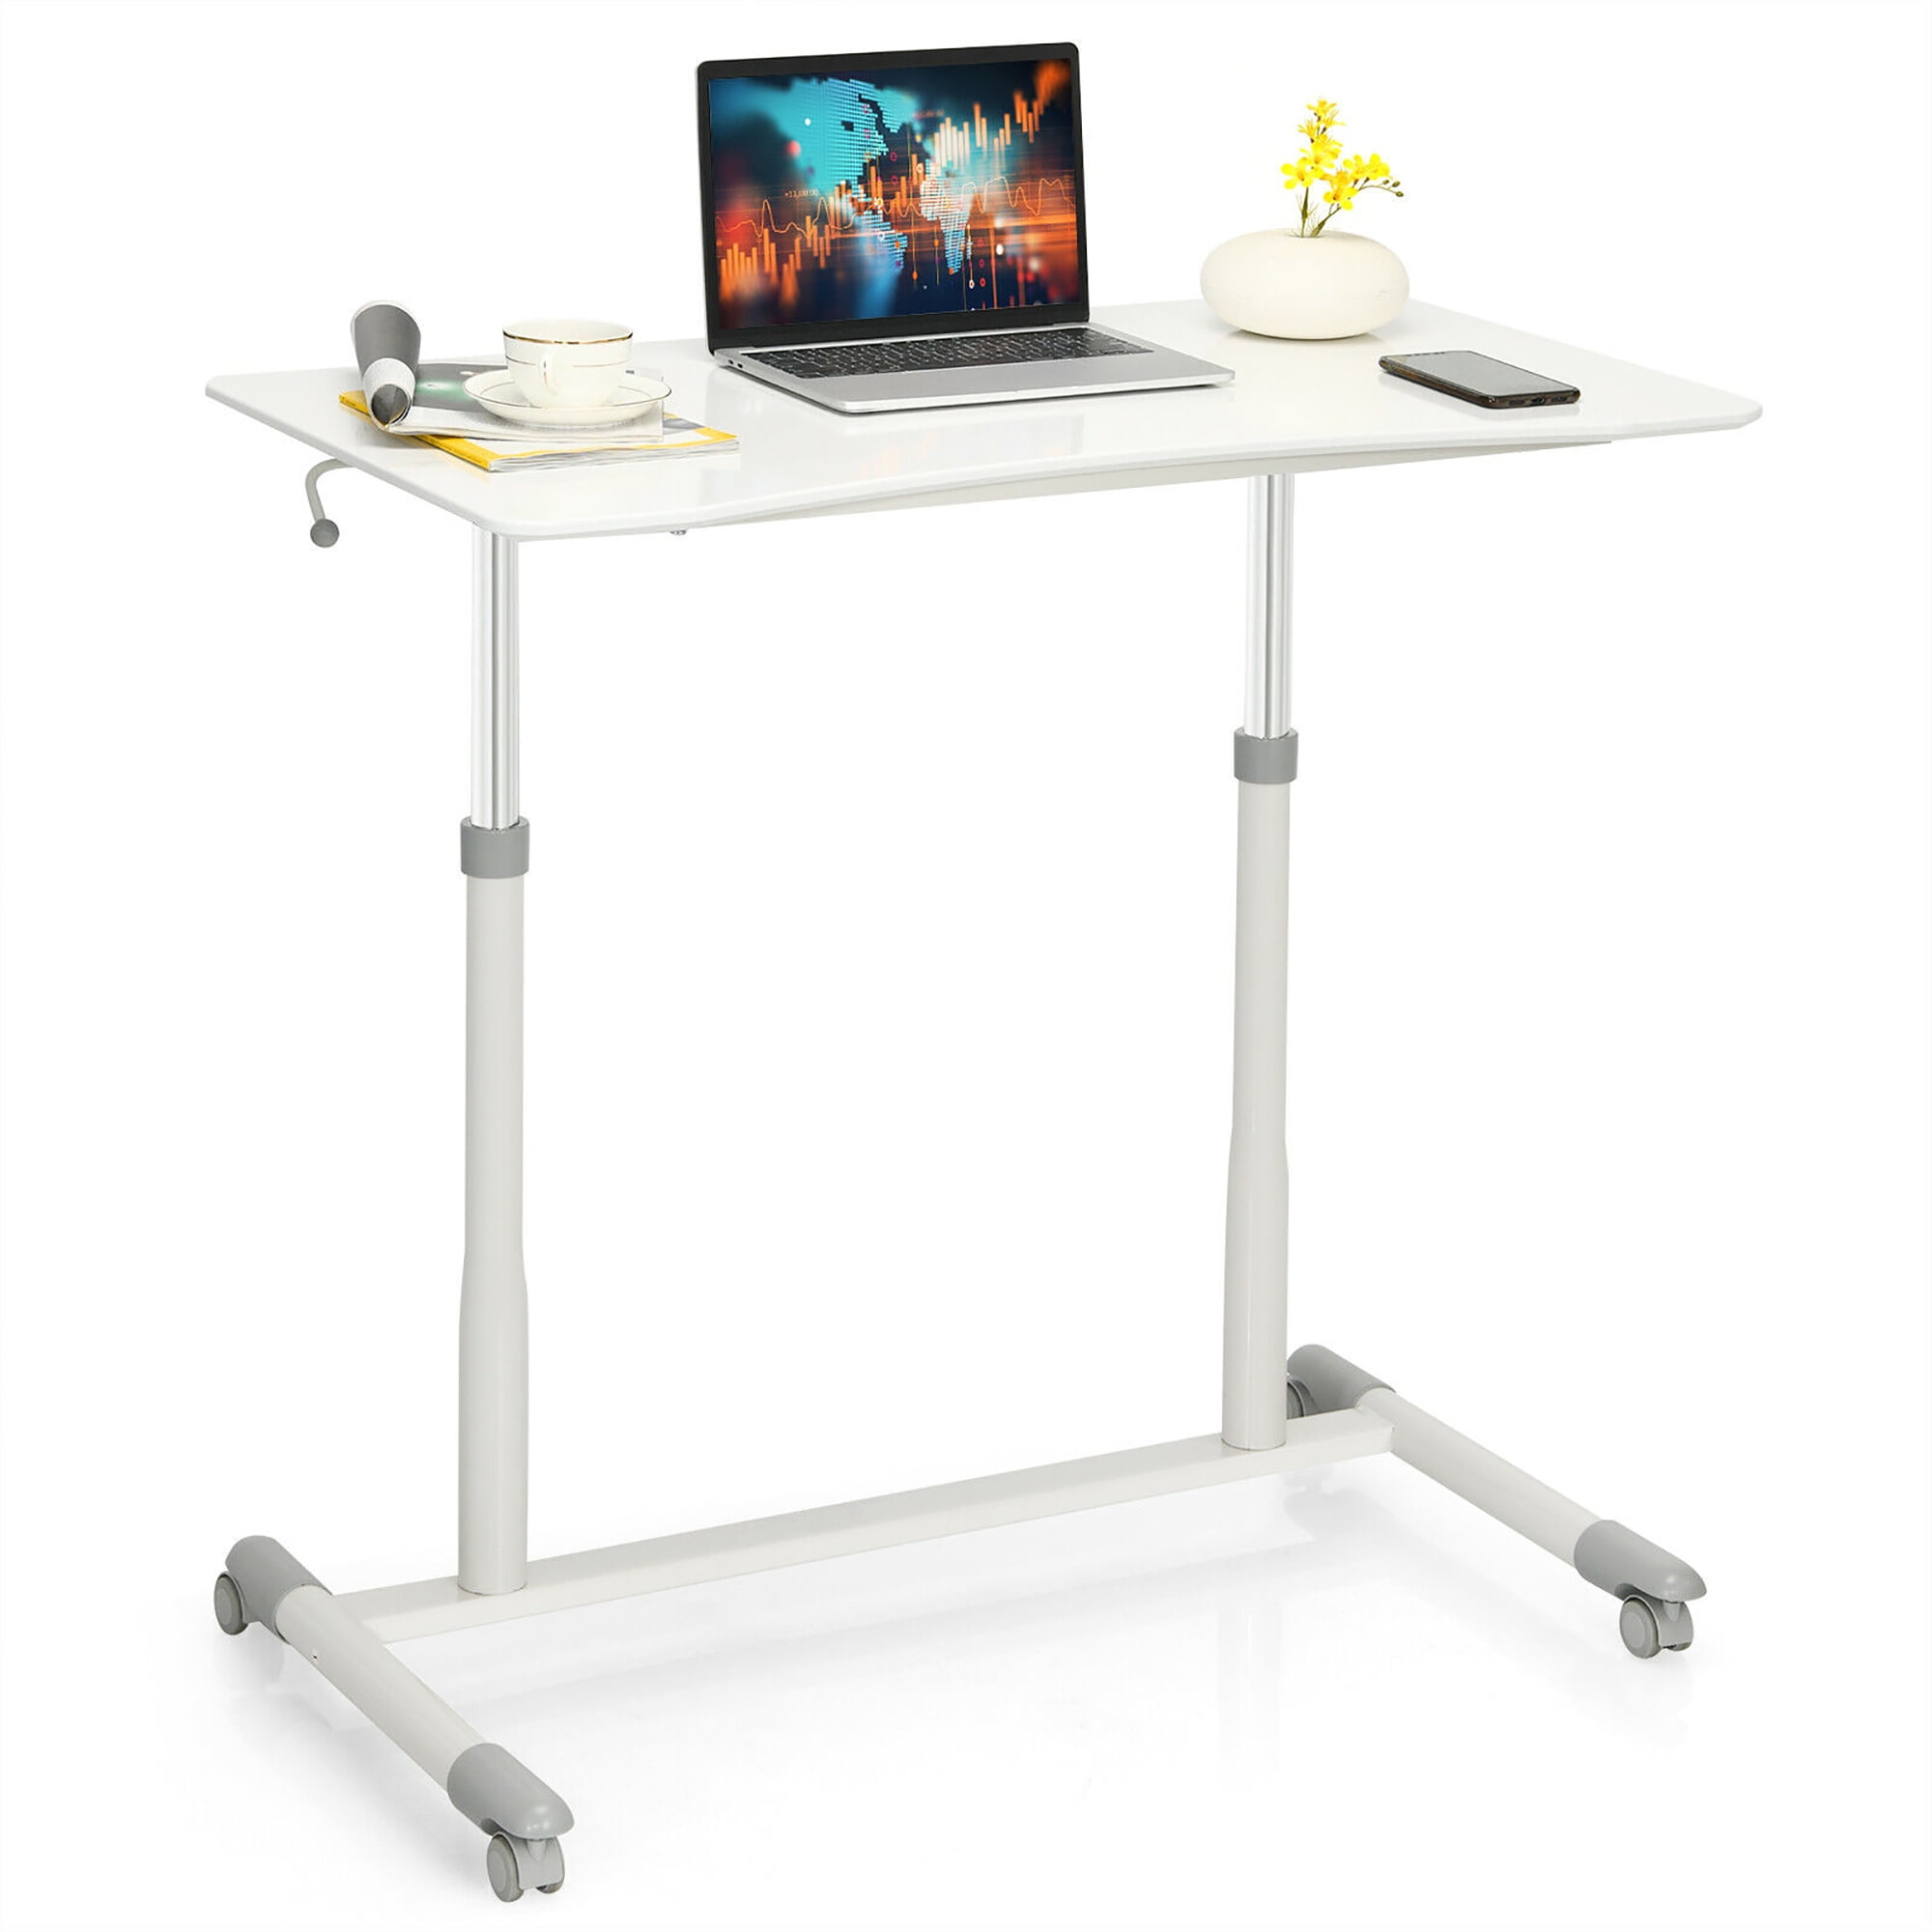 Stand Up Lift Height Adjustable Mobile Computer Desk Laptop PC Table With Shelf 